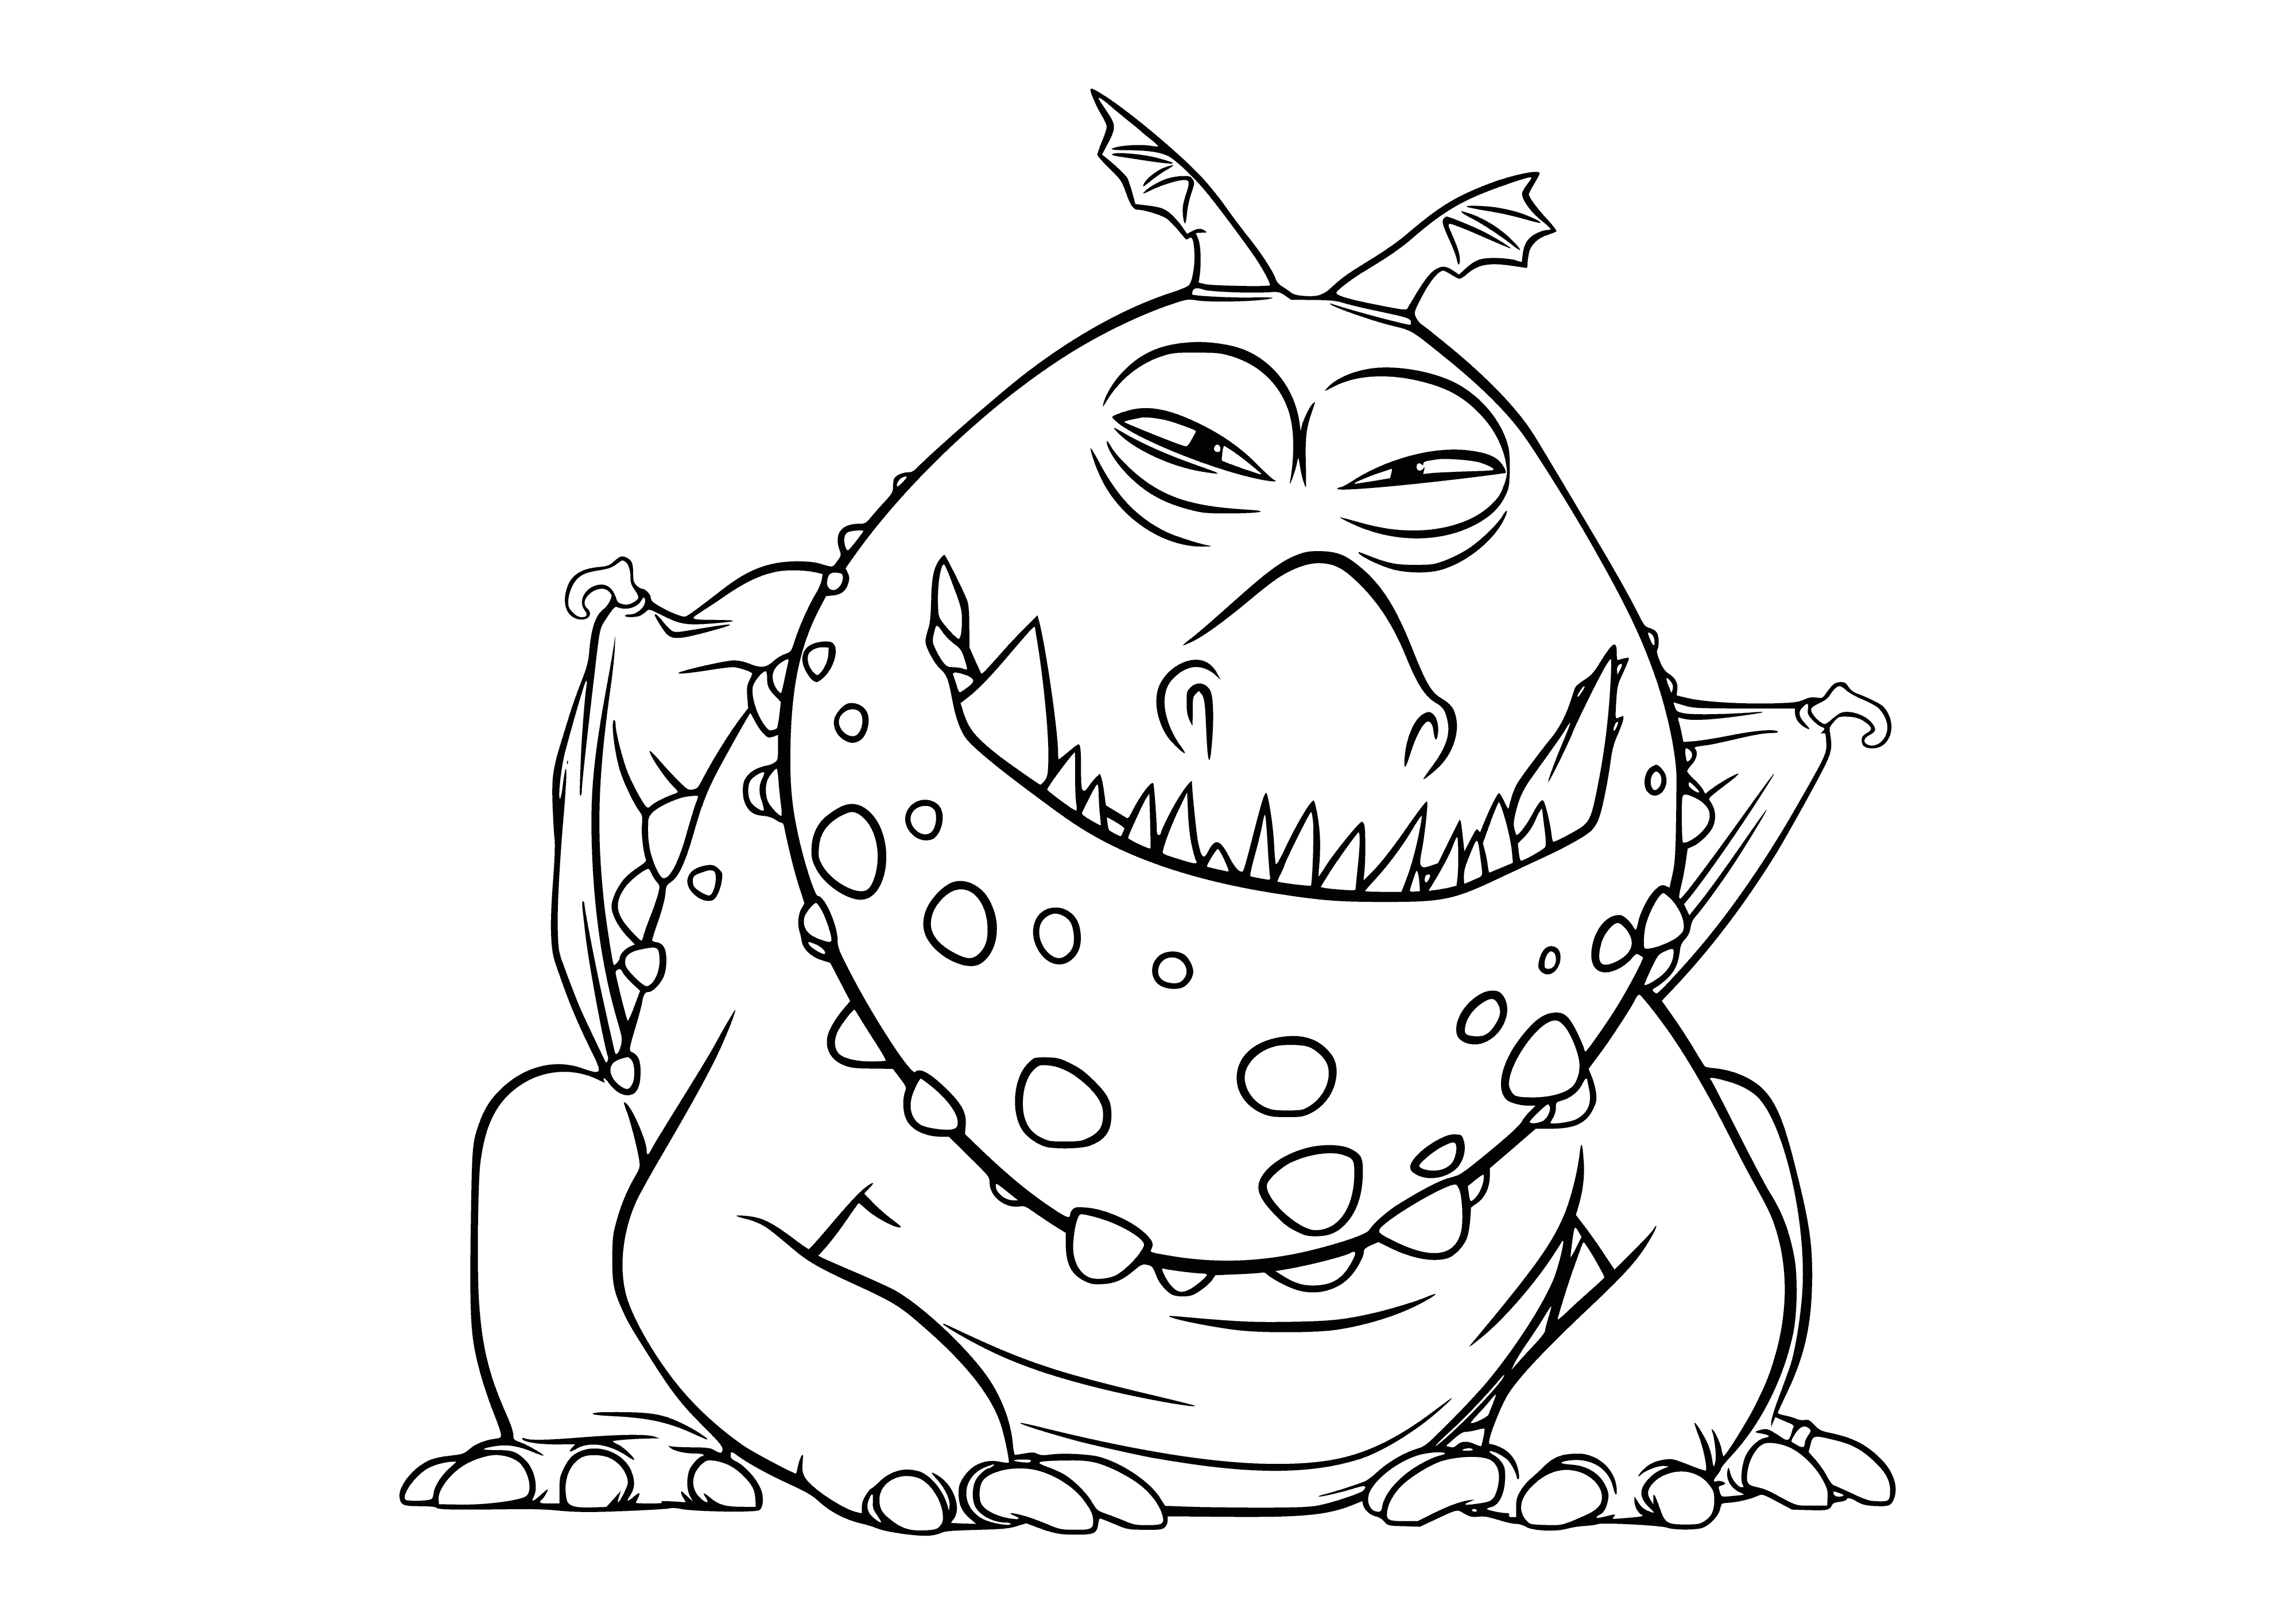 Grommel coloring page